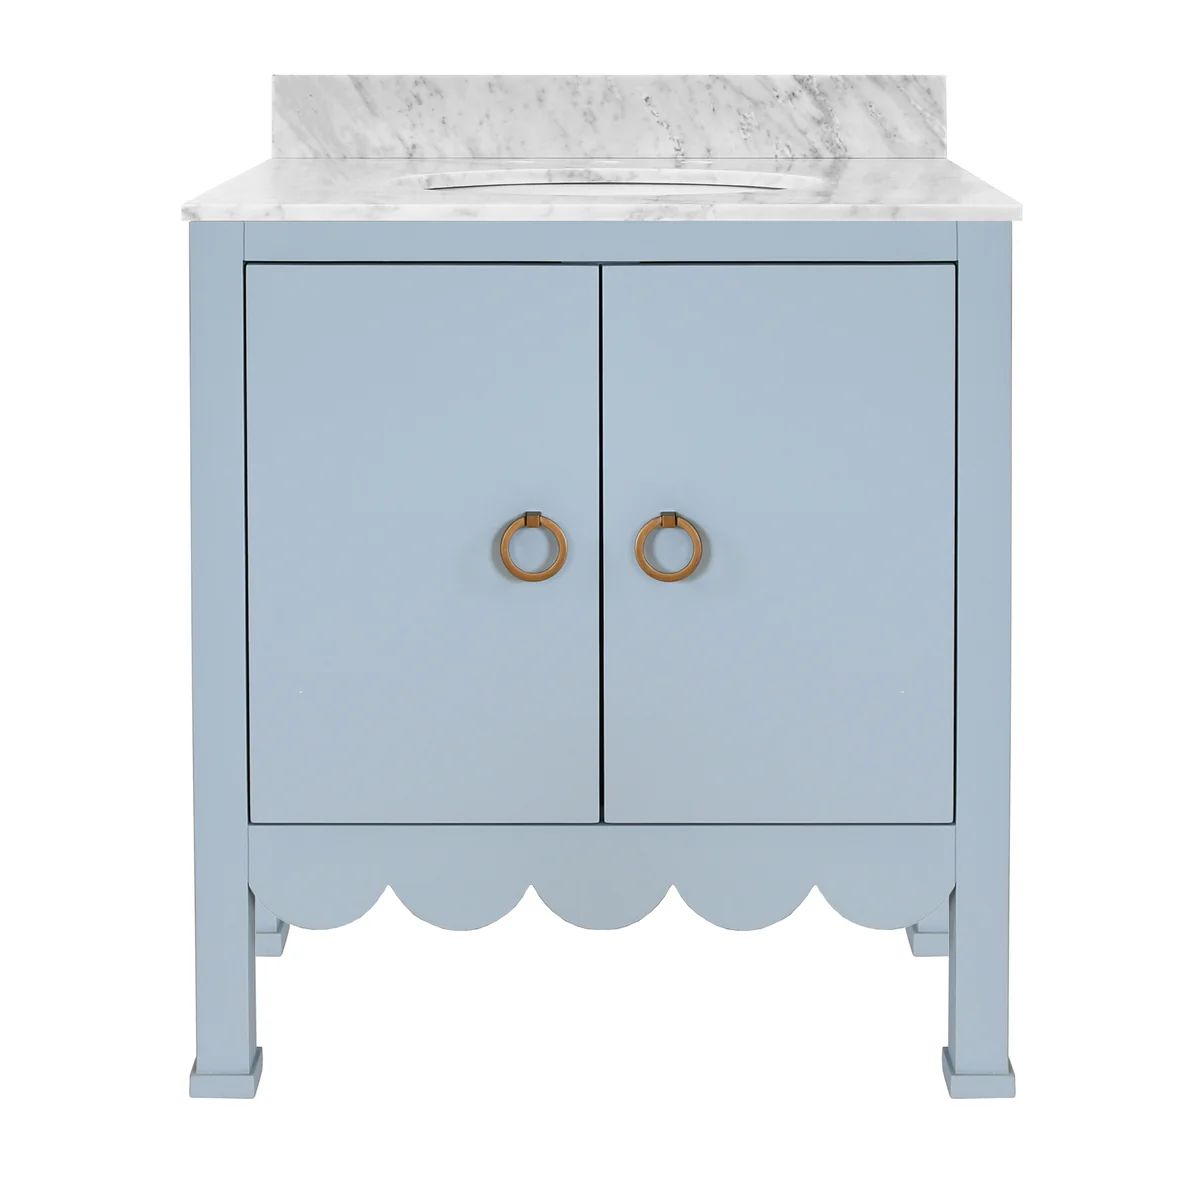 Kealey Vanity | The Well Appointed House, LLC